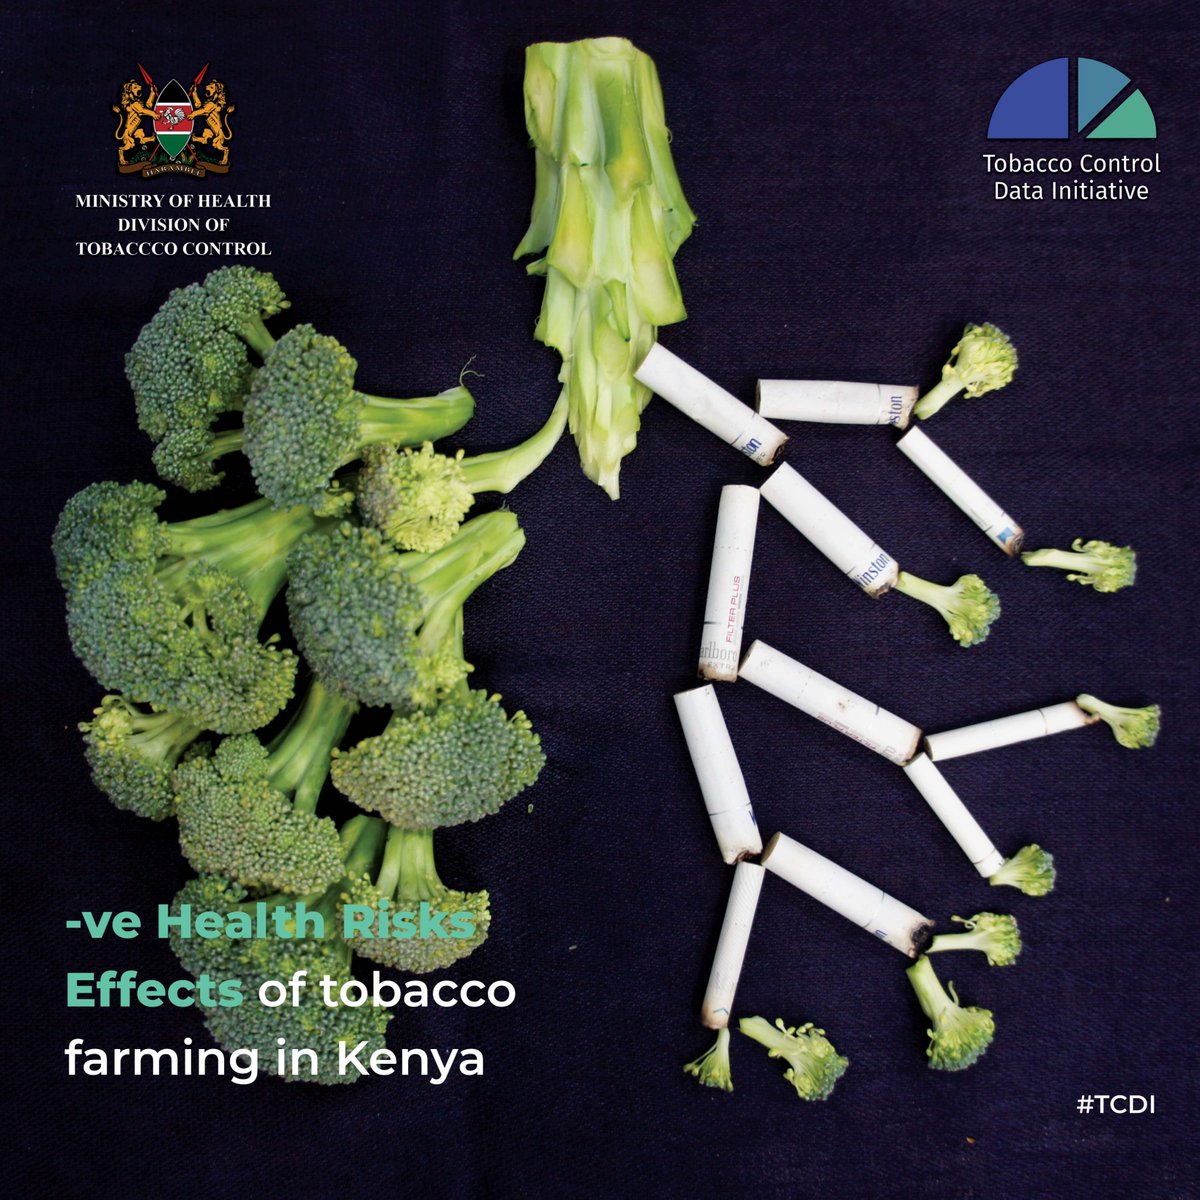 🚫 Danger Lurks in Tobacco Farming! 🚫

Farmers are at risk of Green #Tobacco Sickness from nicotine exposure? In addition, they face various health effects from tobacco smoke & emissions during curing and storage of tobacco leaves

#TobaccoControlData 
#TCDI 
#TobaccoFreeFarmsKE